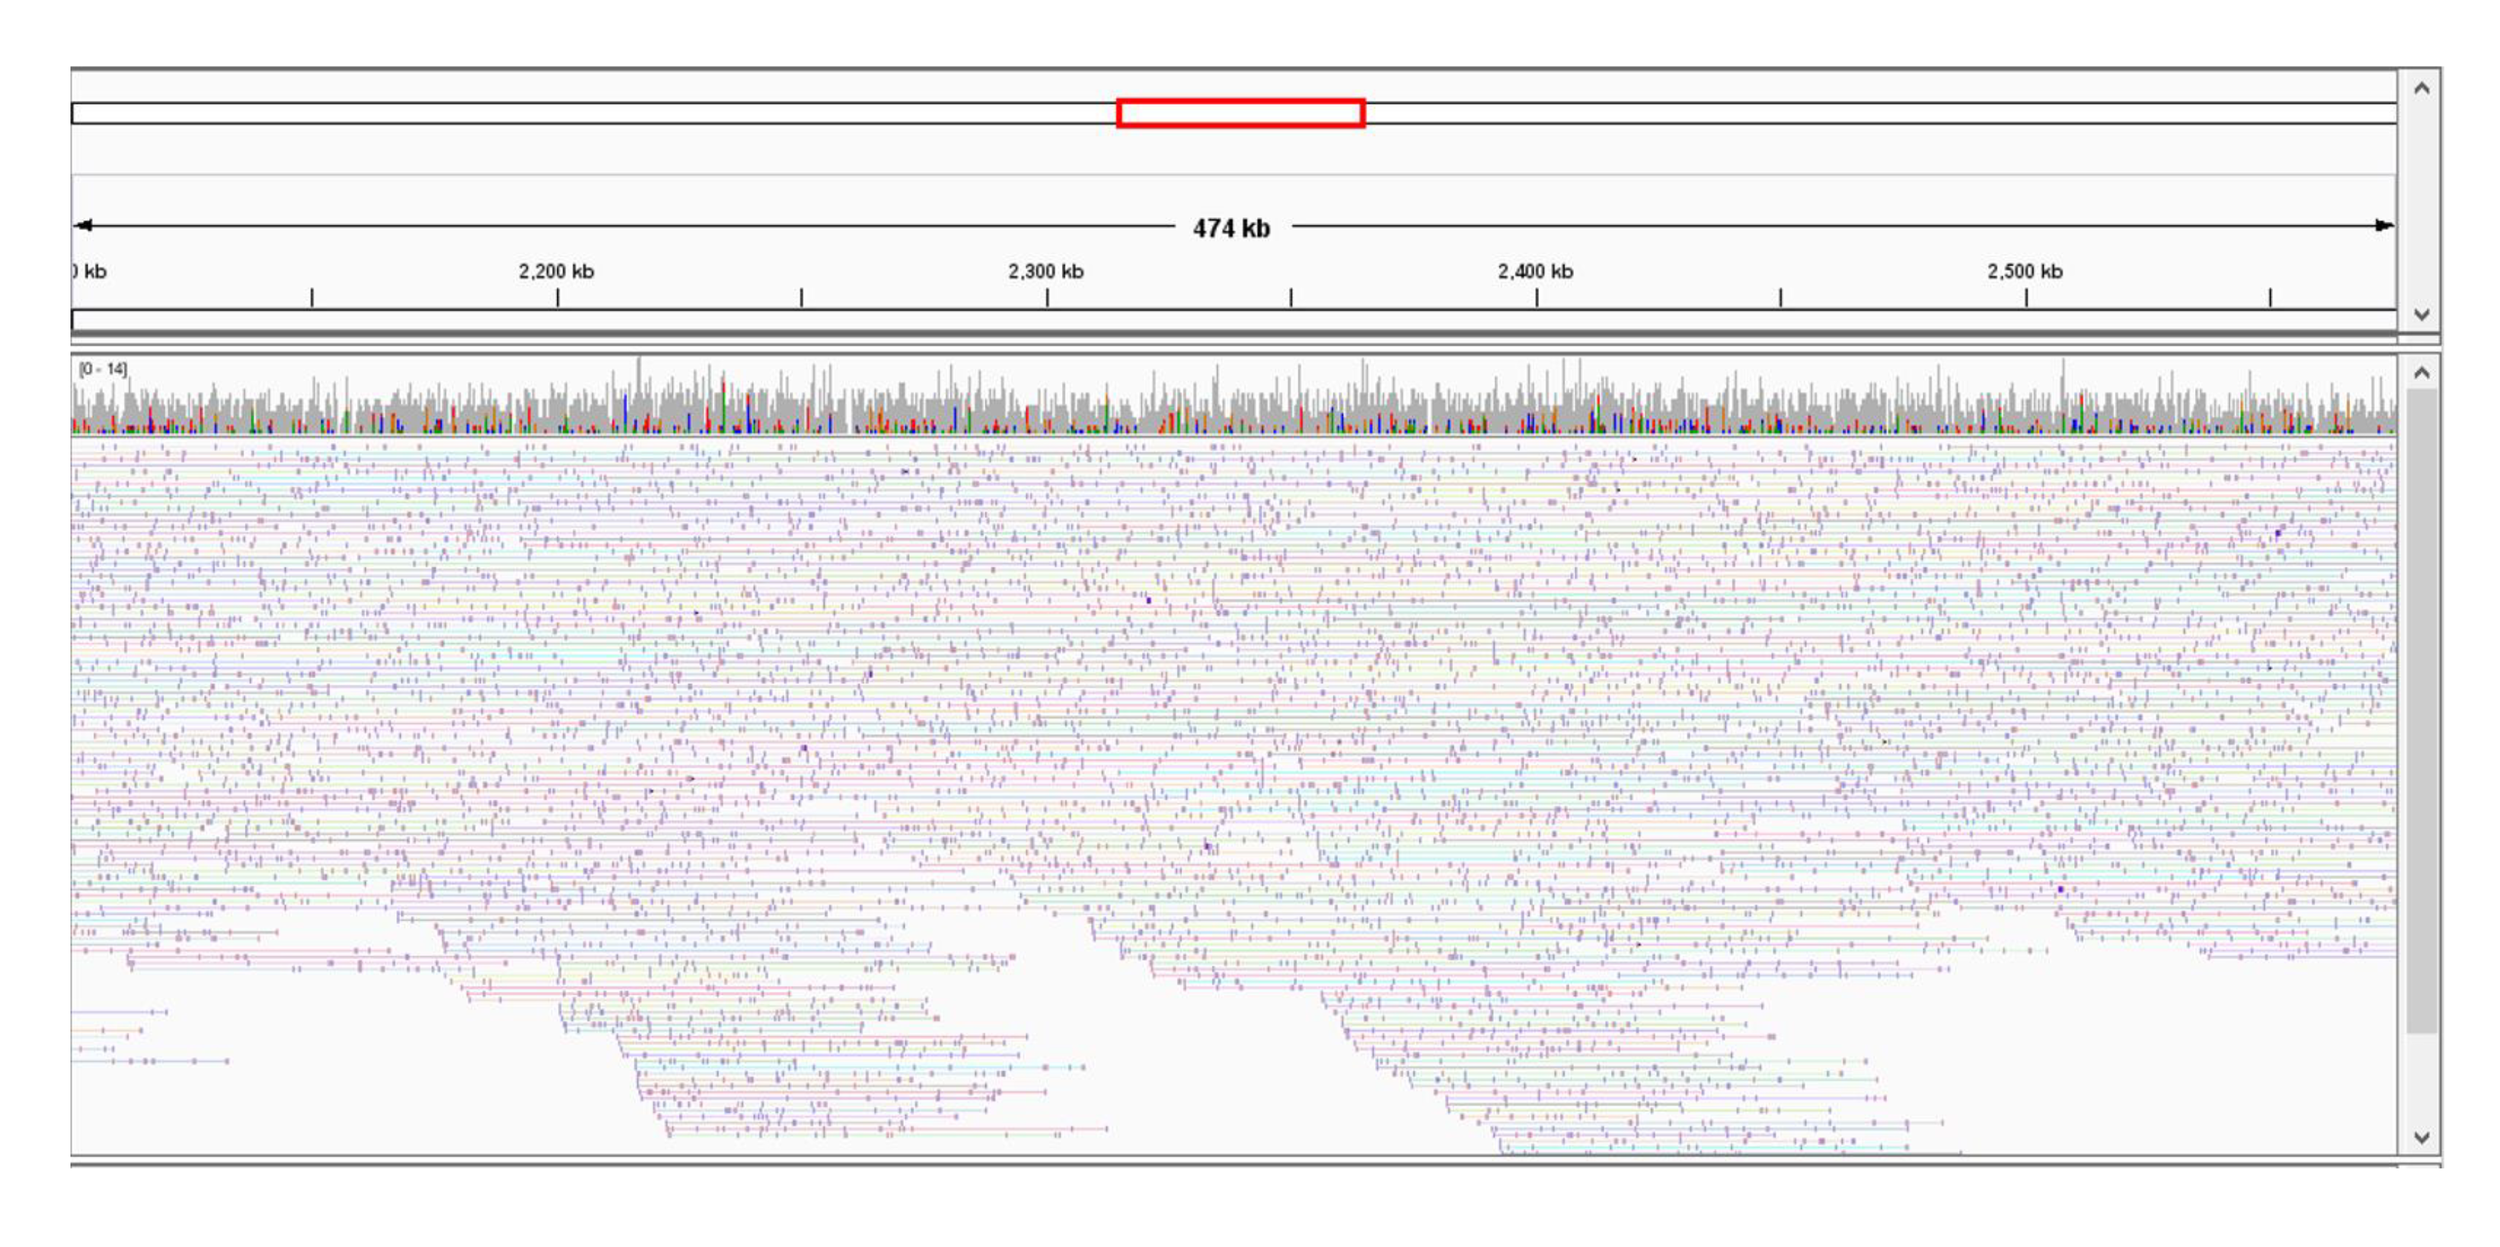 Results I: IGV Snapshot of TELL-Seq Linked Reads